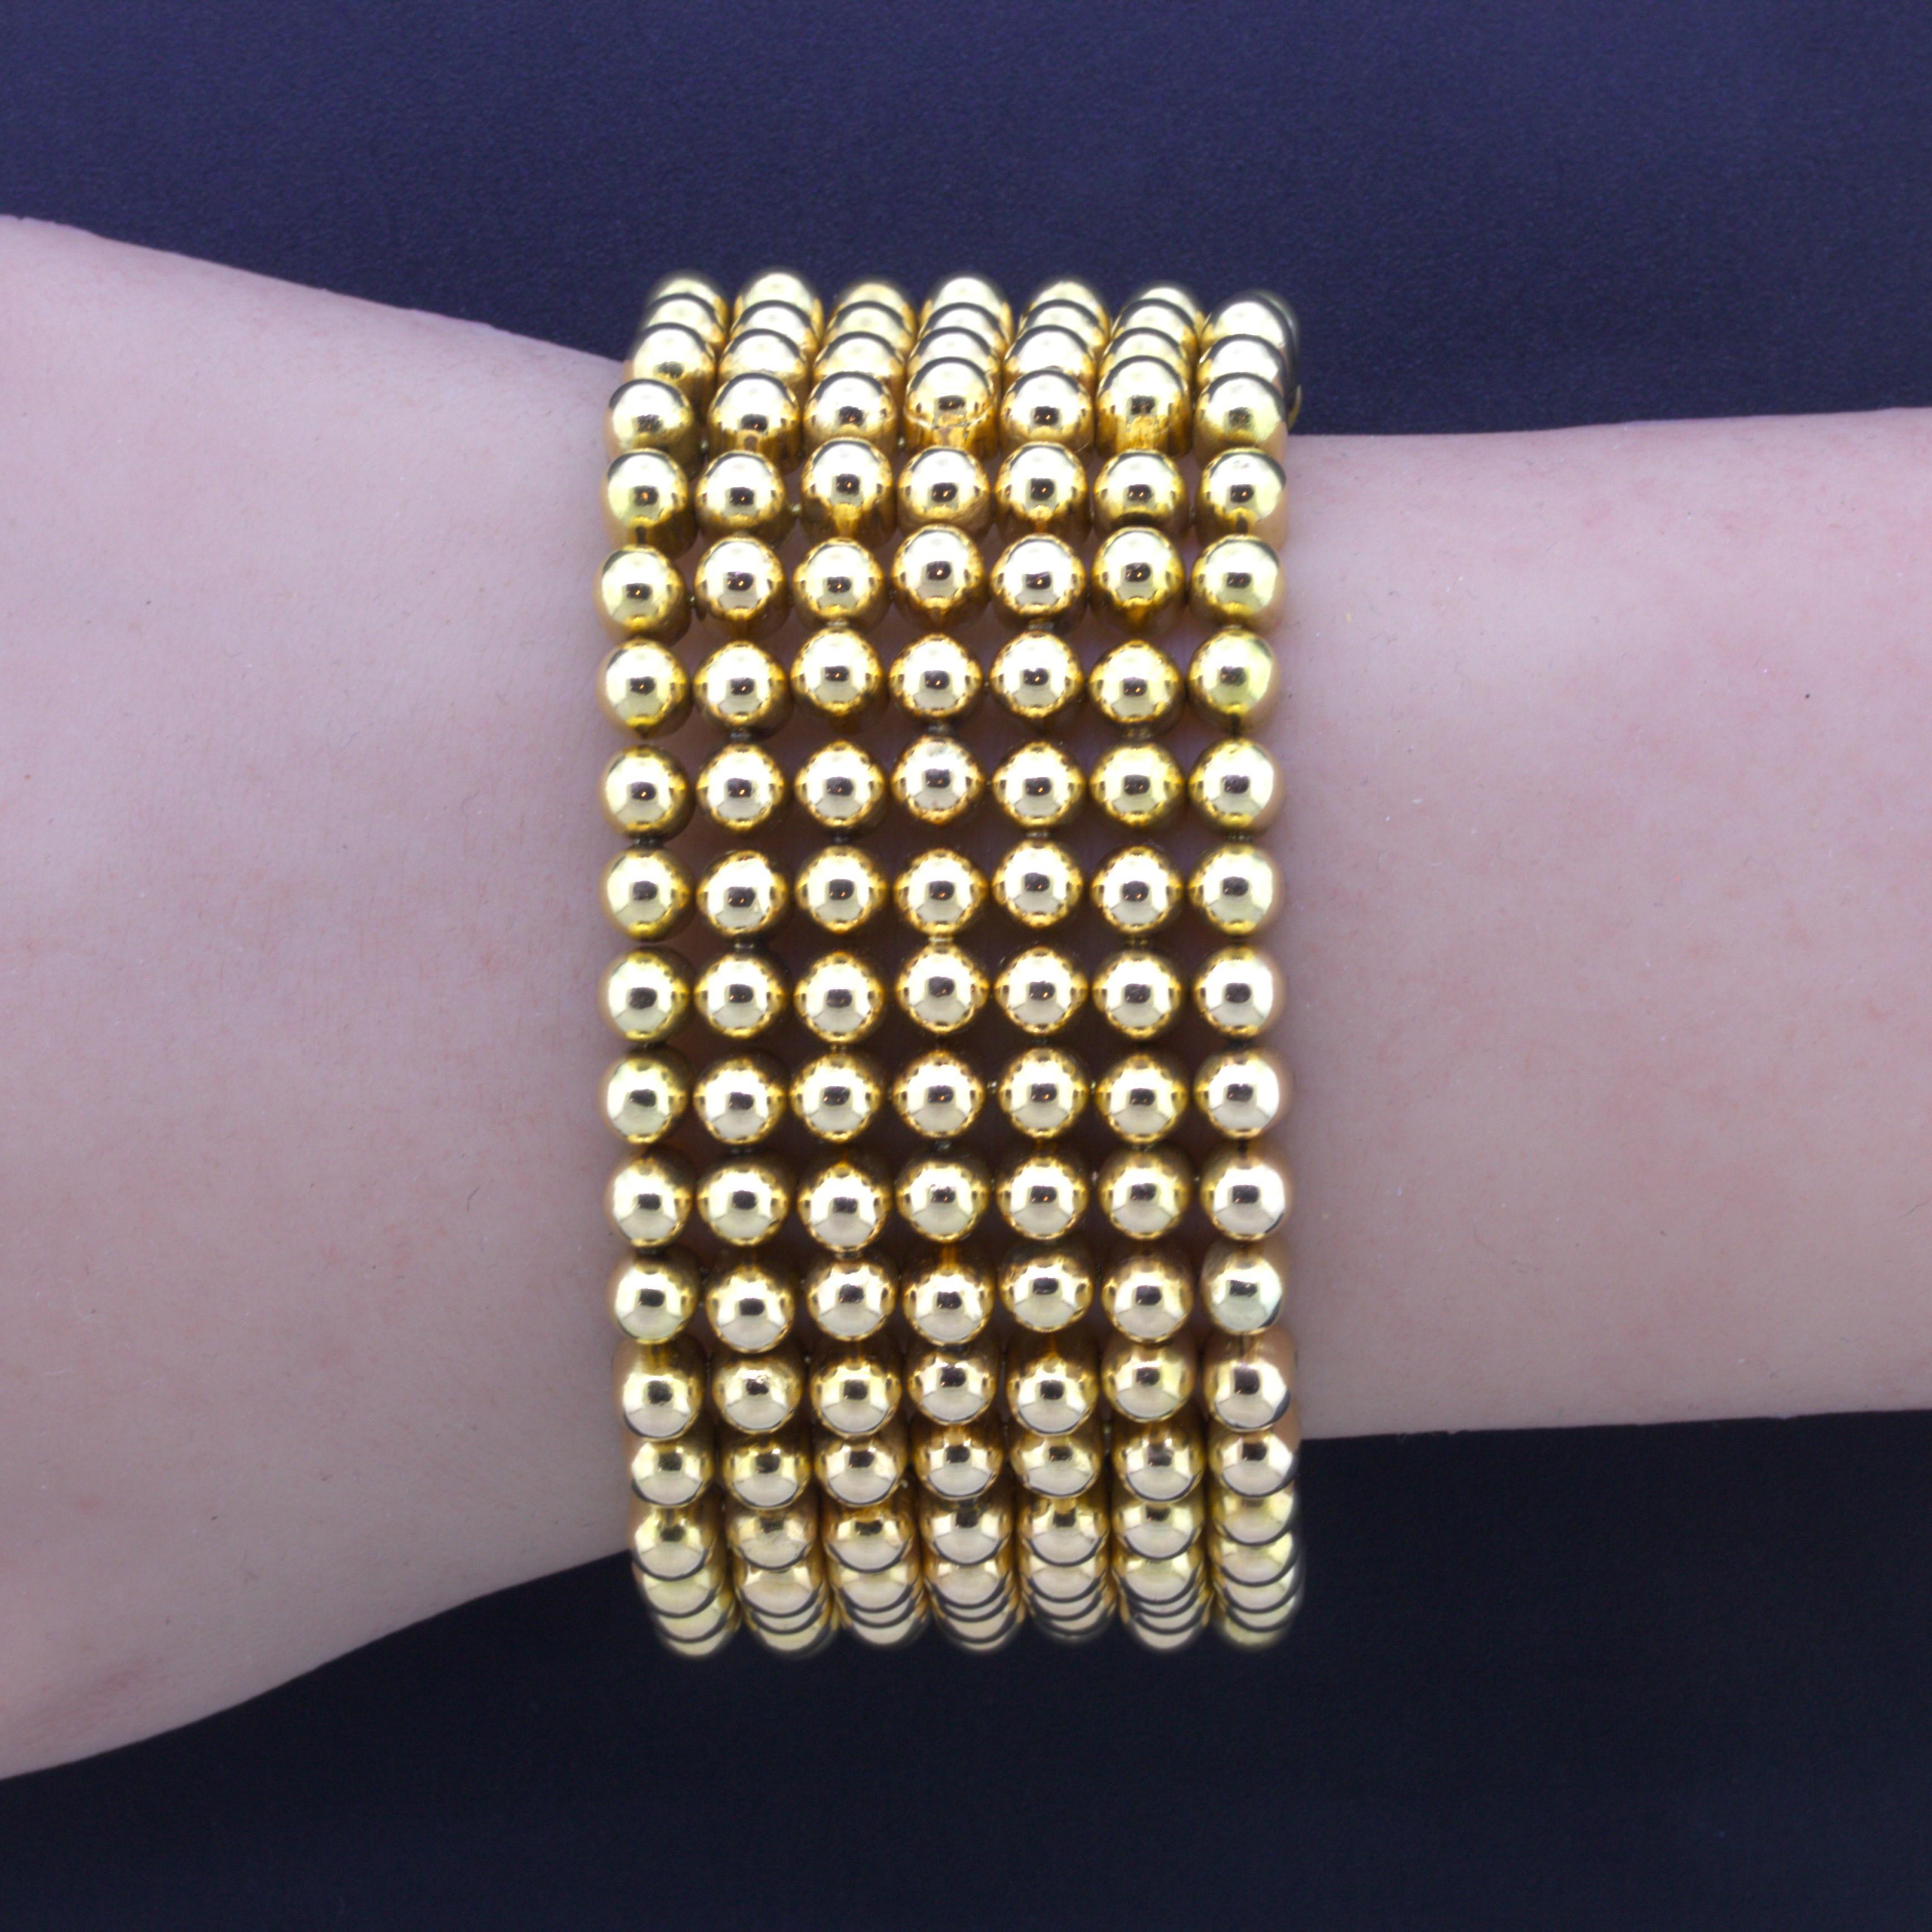 A stylish 18k gold bracelet made in the 1960’s. It is designed as 7 rows of domed beads set by each other giving the piece a unique look. Completed with clasp and safety to ensure secure fit. Made in 18k gold that is between rose and yellow color.